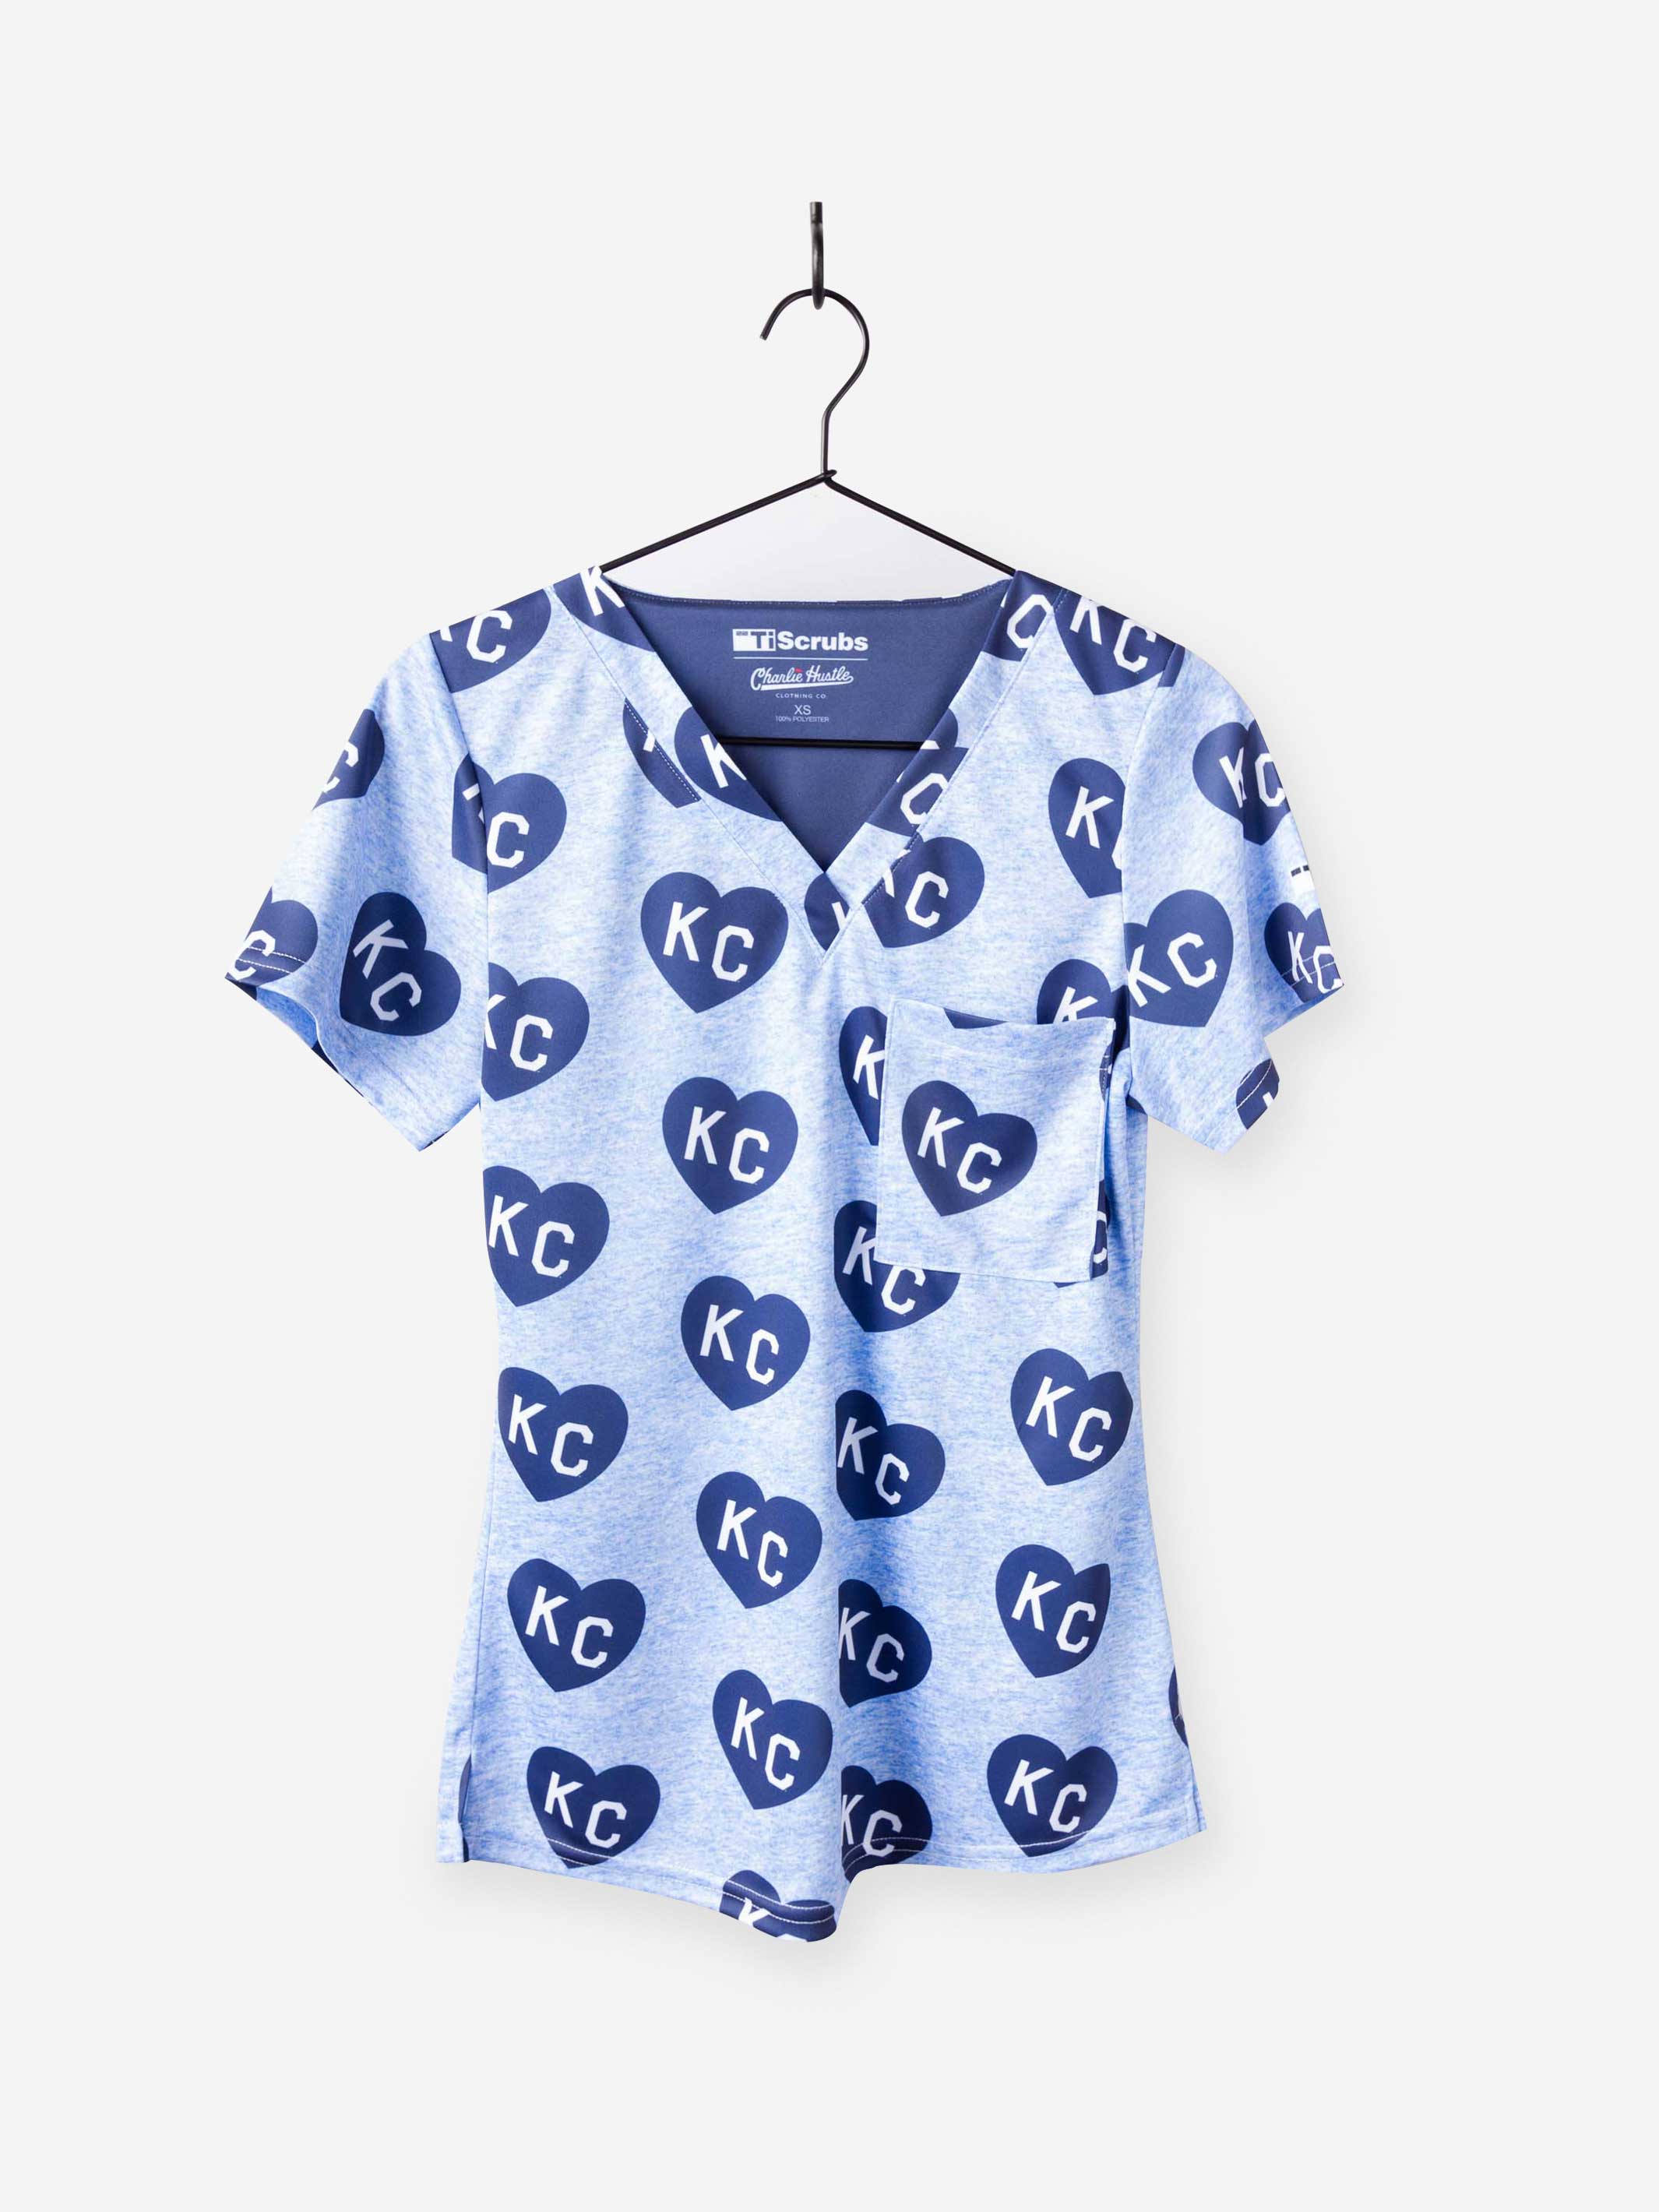 Women's Charlie Hustle Print Scrub Top in Navy and Ceil Blue with 1 Pocket